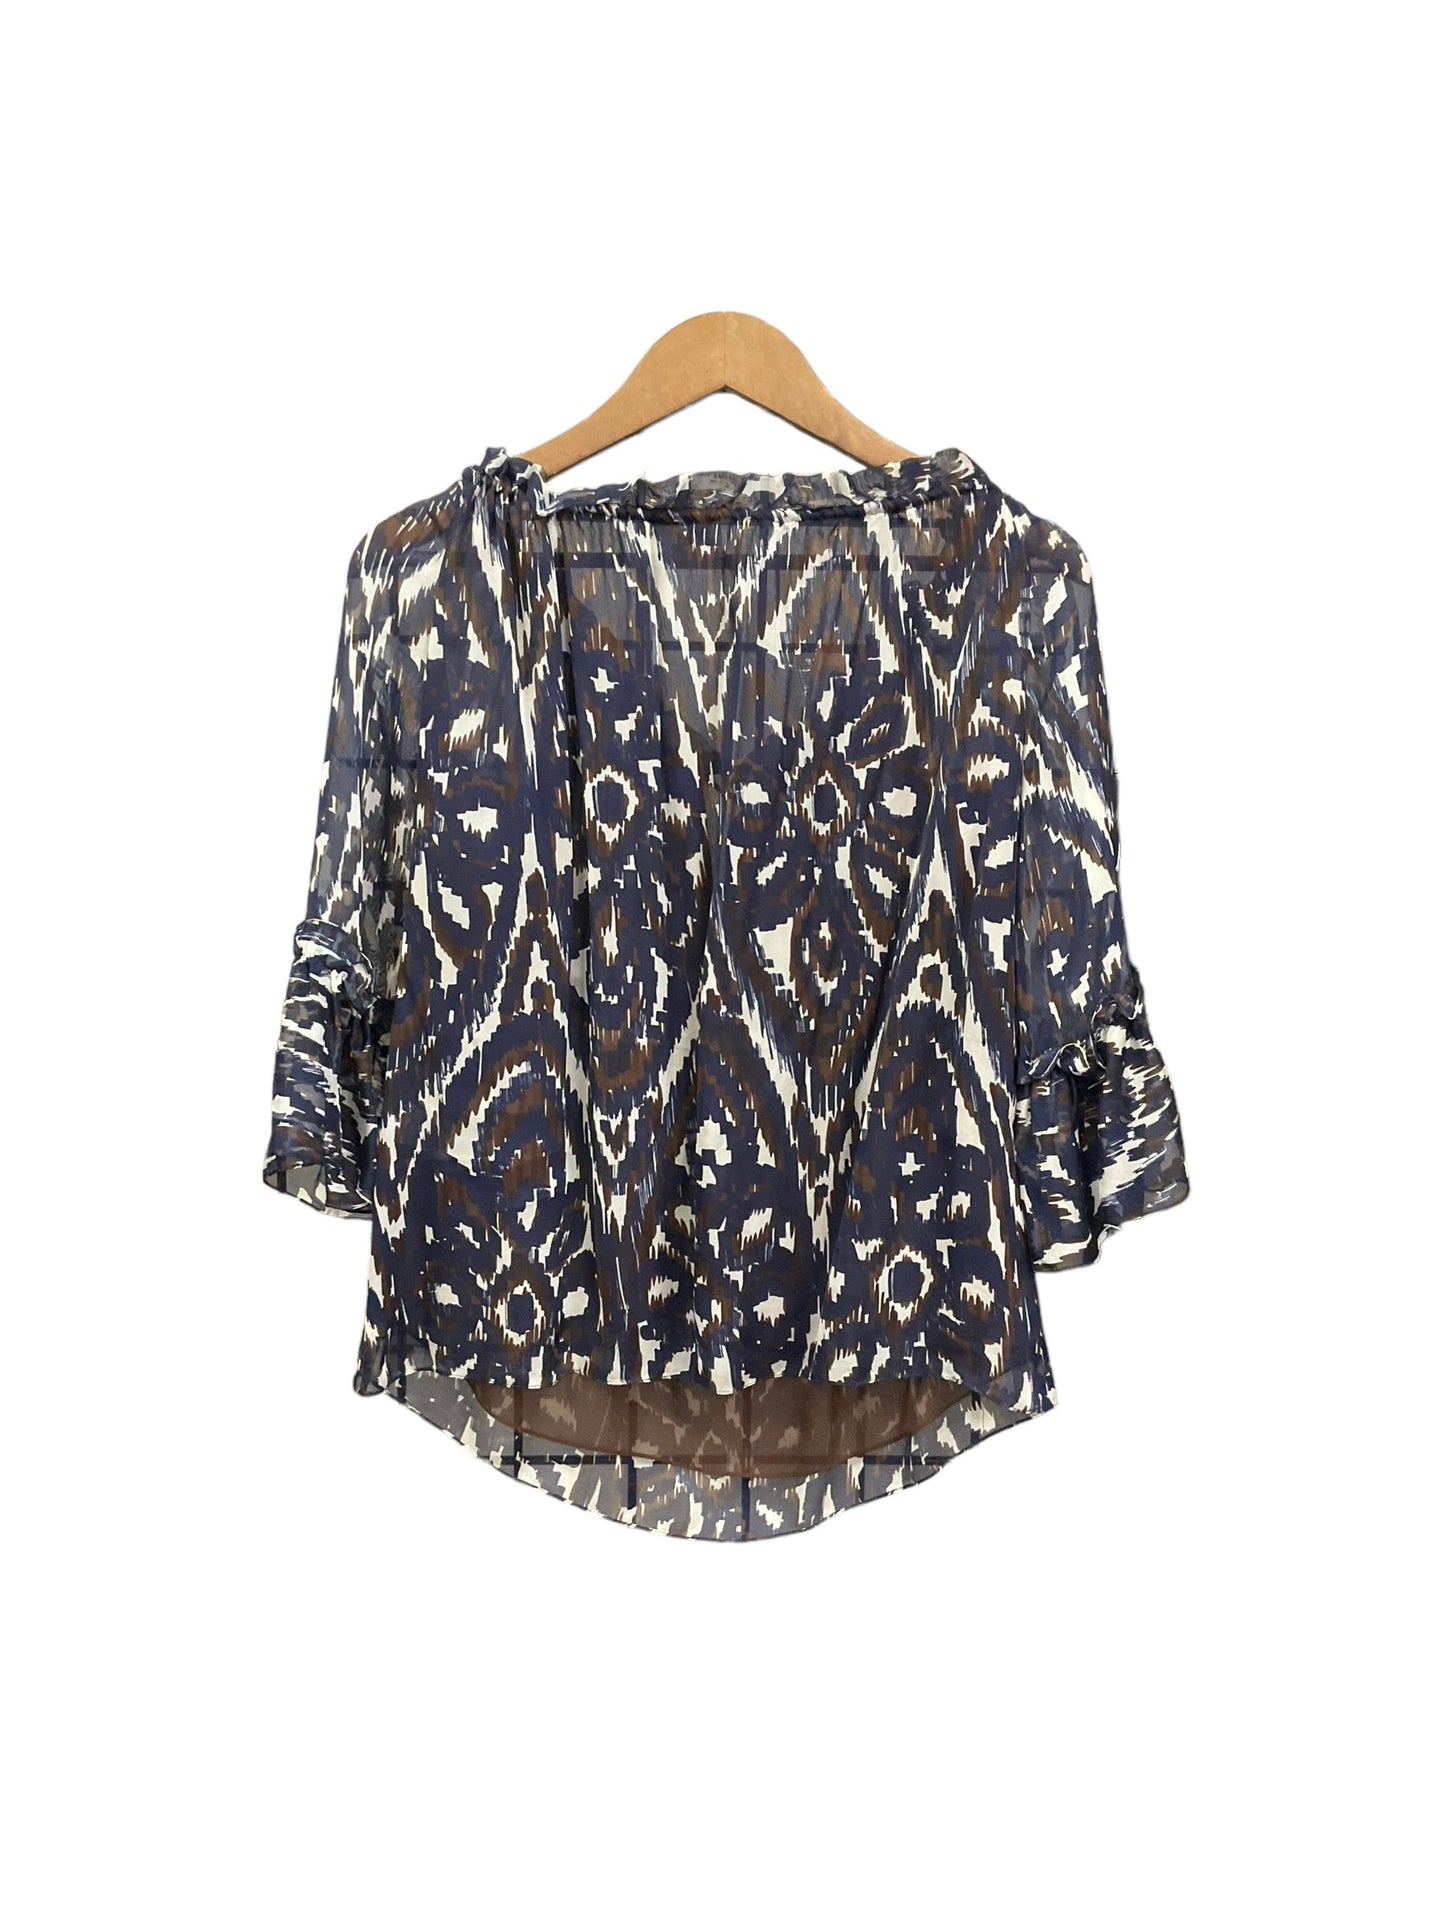 Blouse 3/4 Sleeve By Milly  Size: S